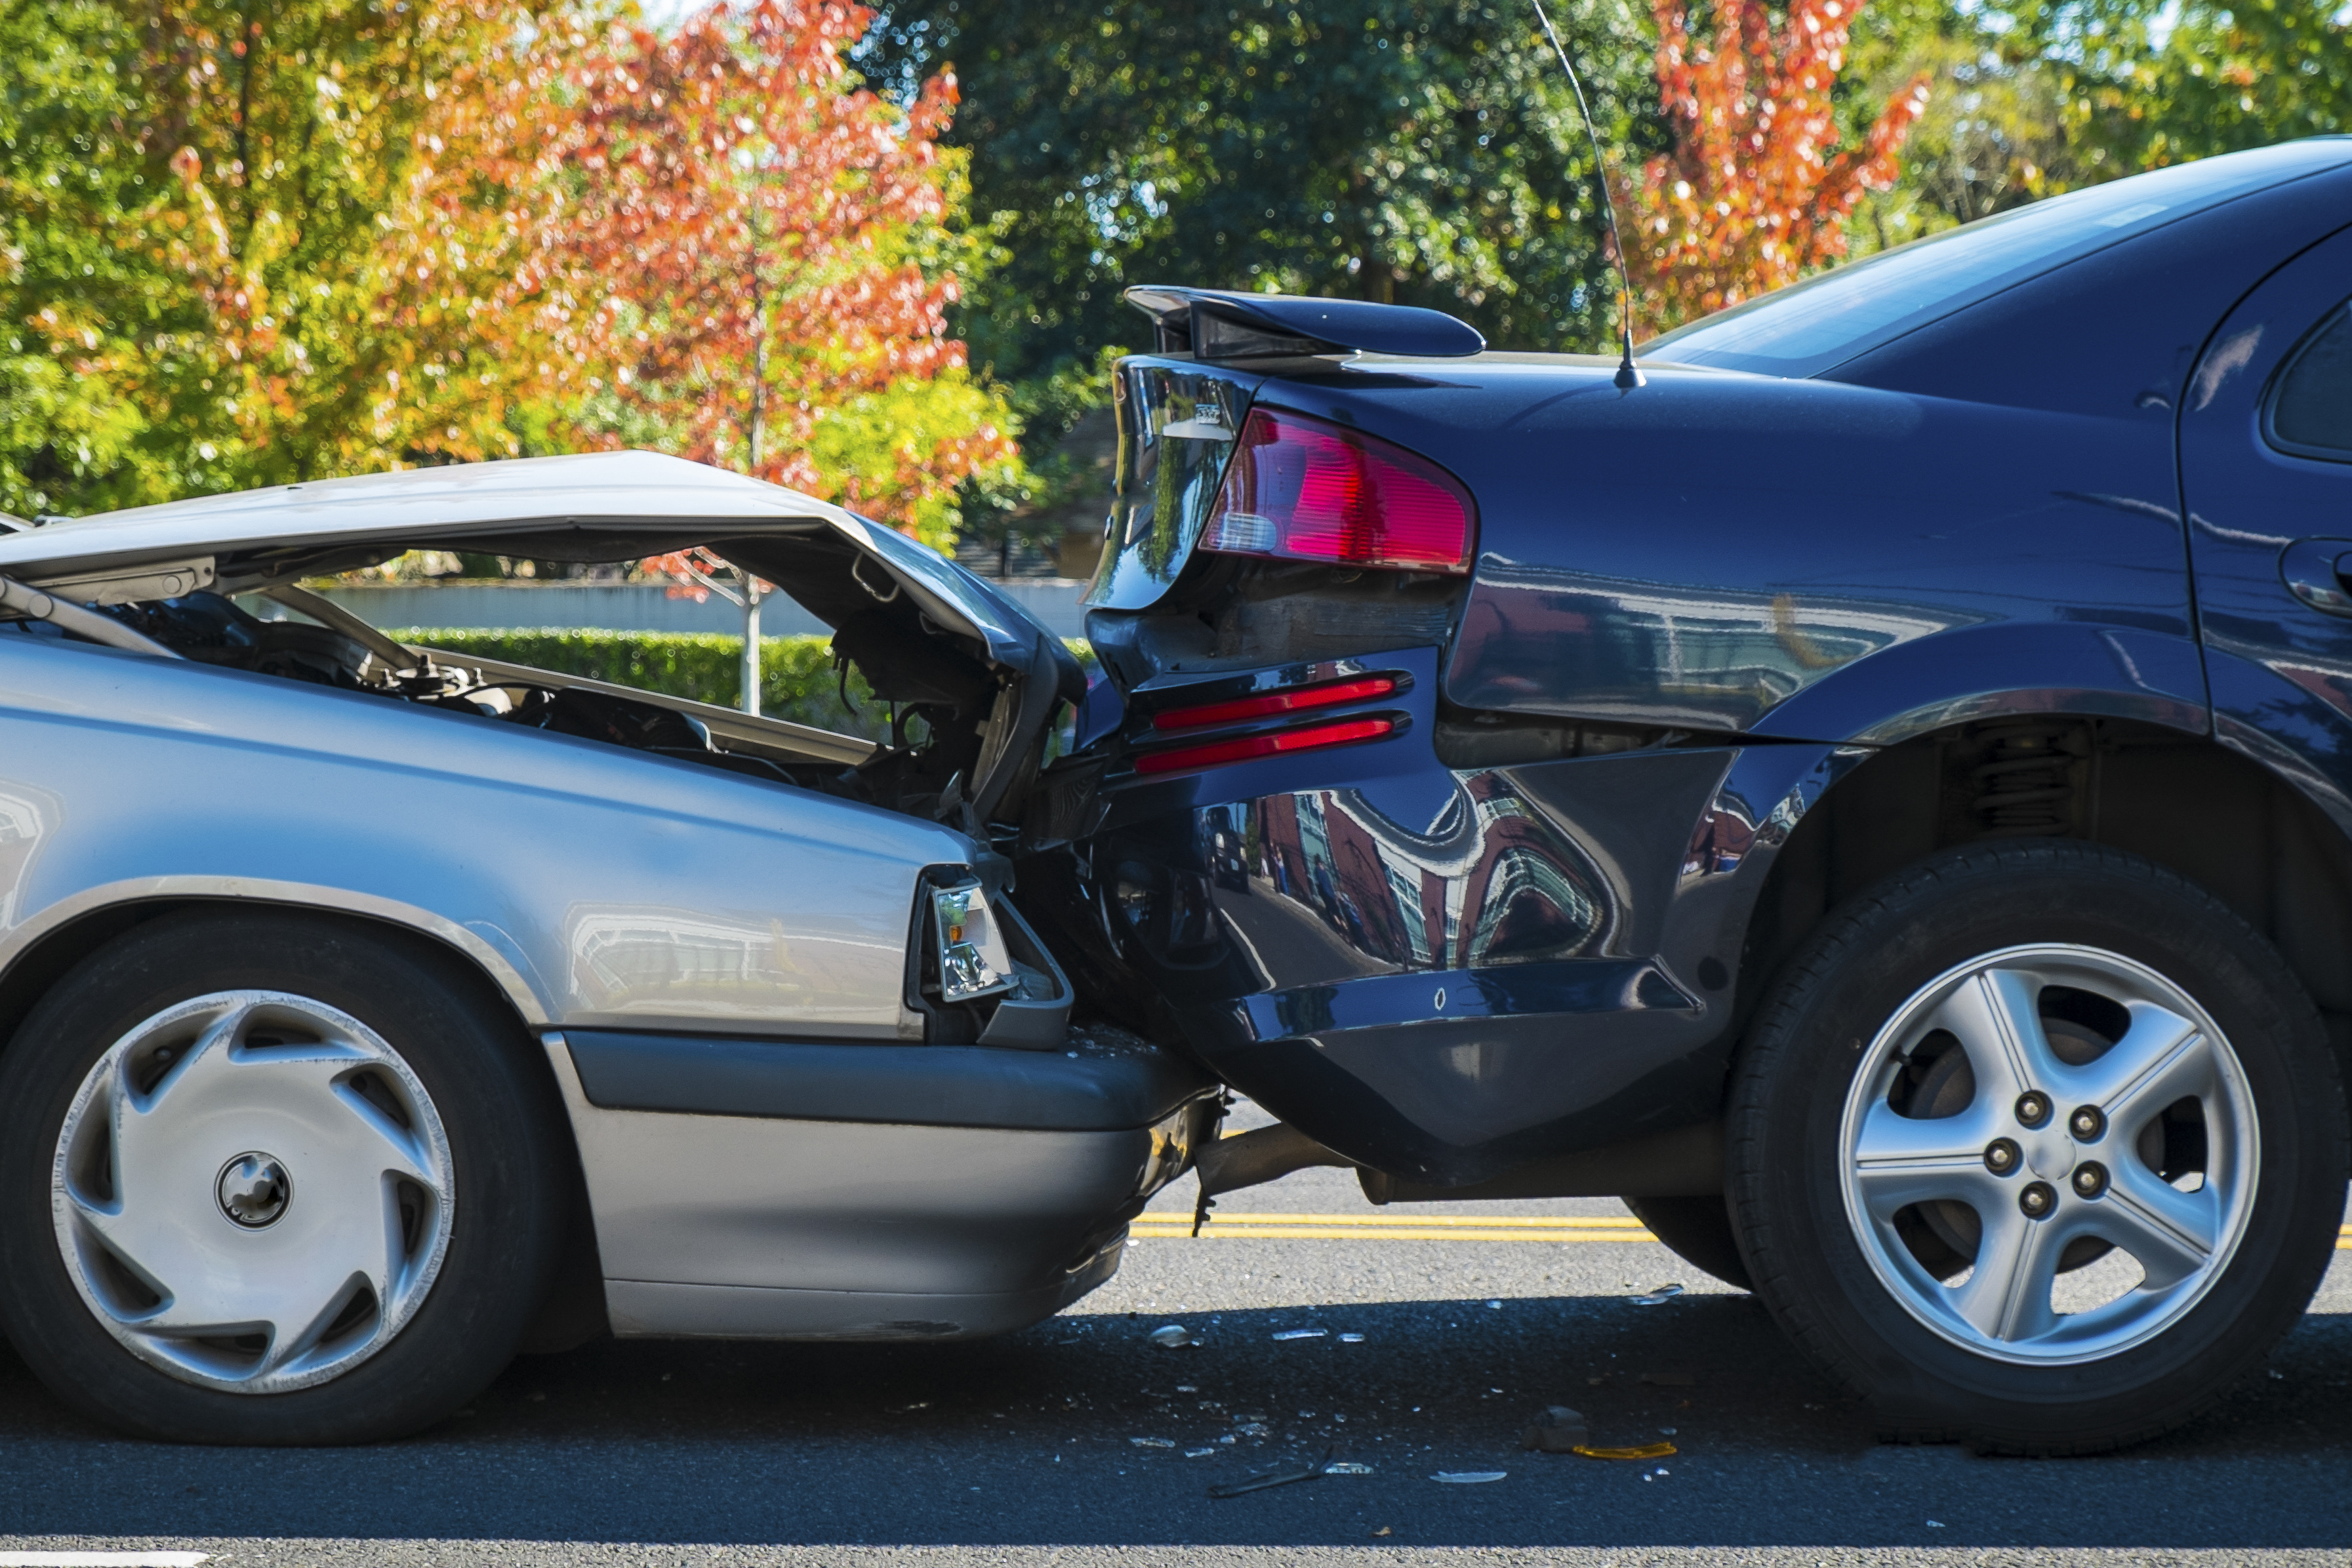 3 Myths That Don't Help You Save on Car Insurance